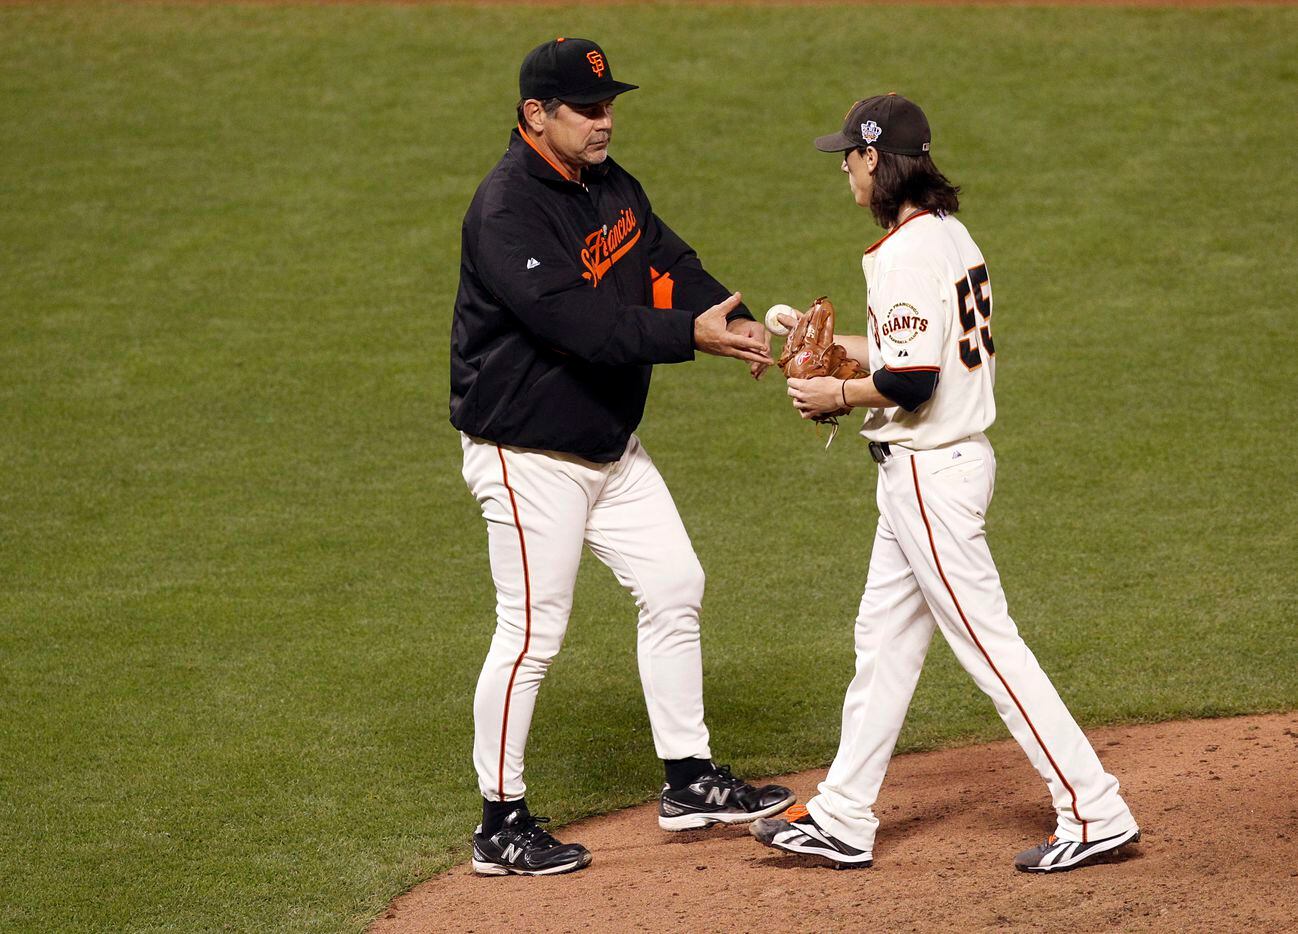 San Francisco Giants starter Tim Lincecum is relieved from the game as he hands the ball to...